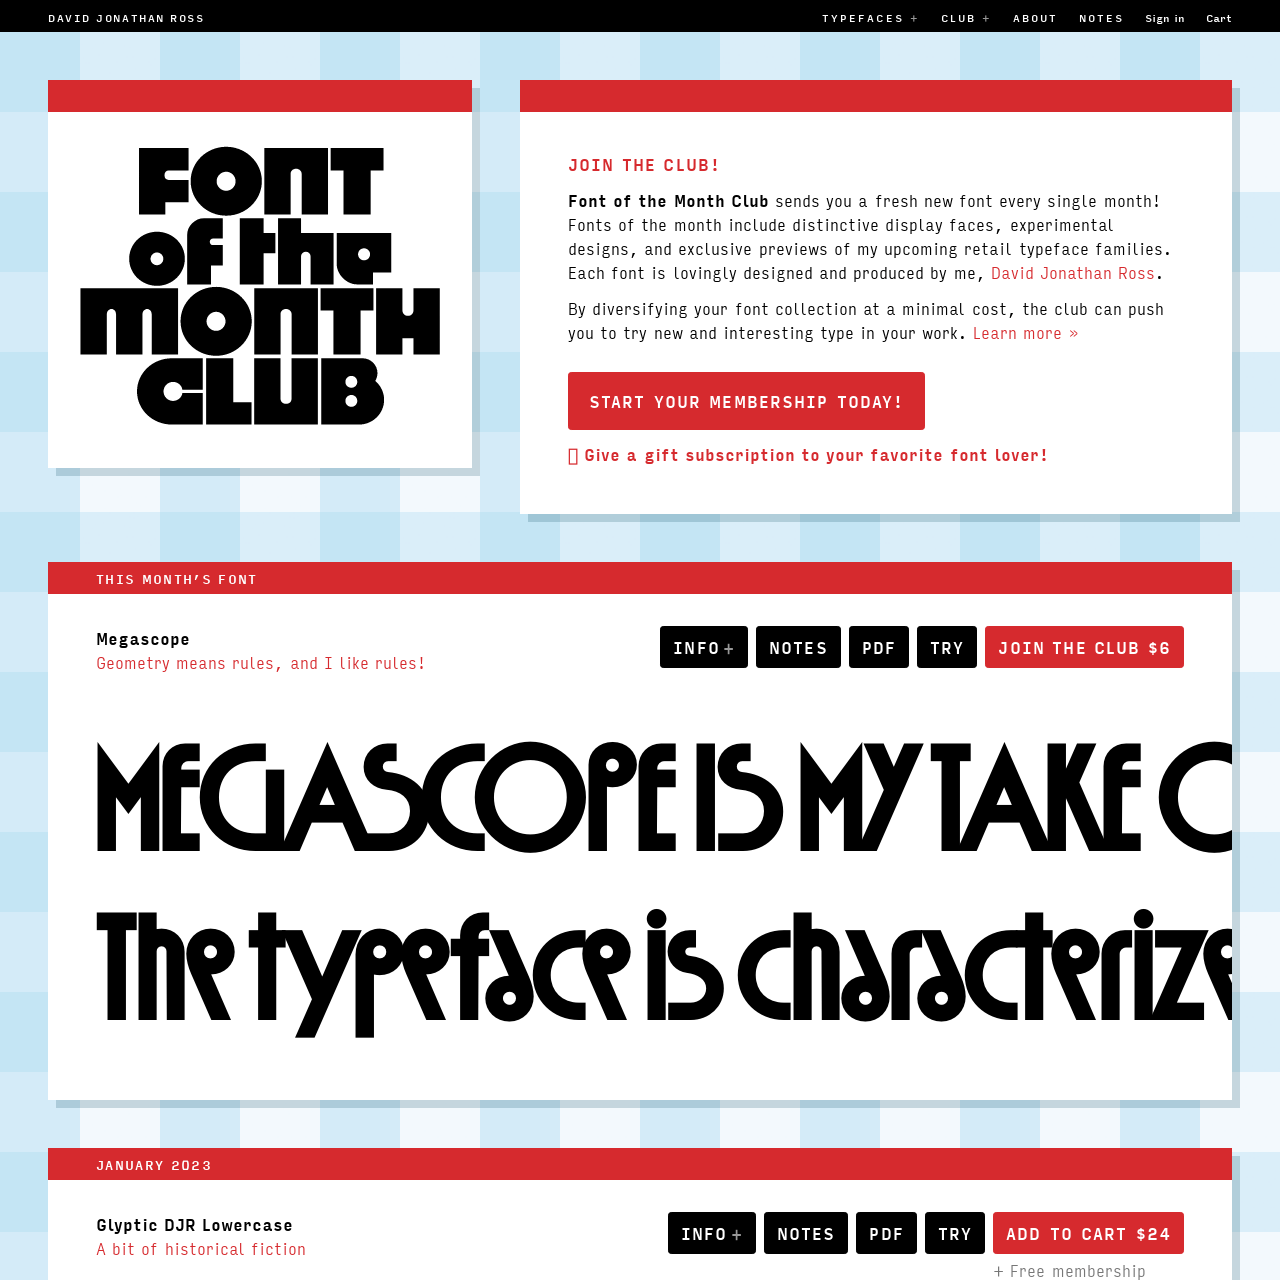 Screenshot of Font of the Month Club website